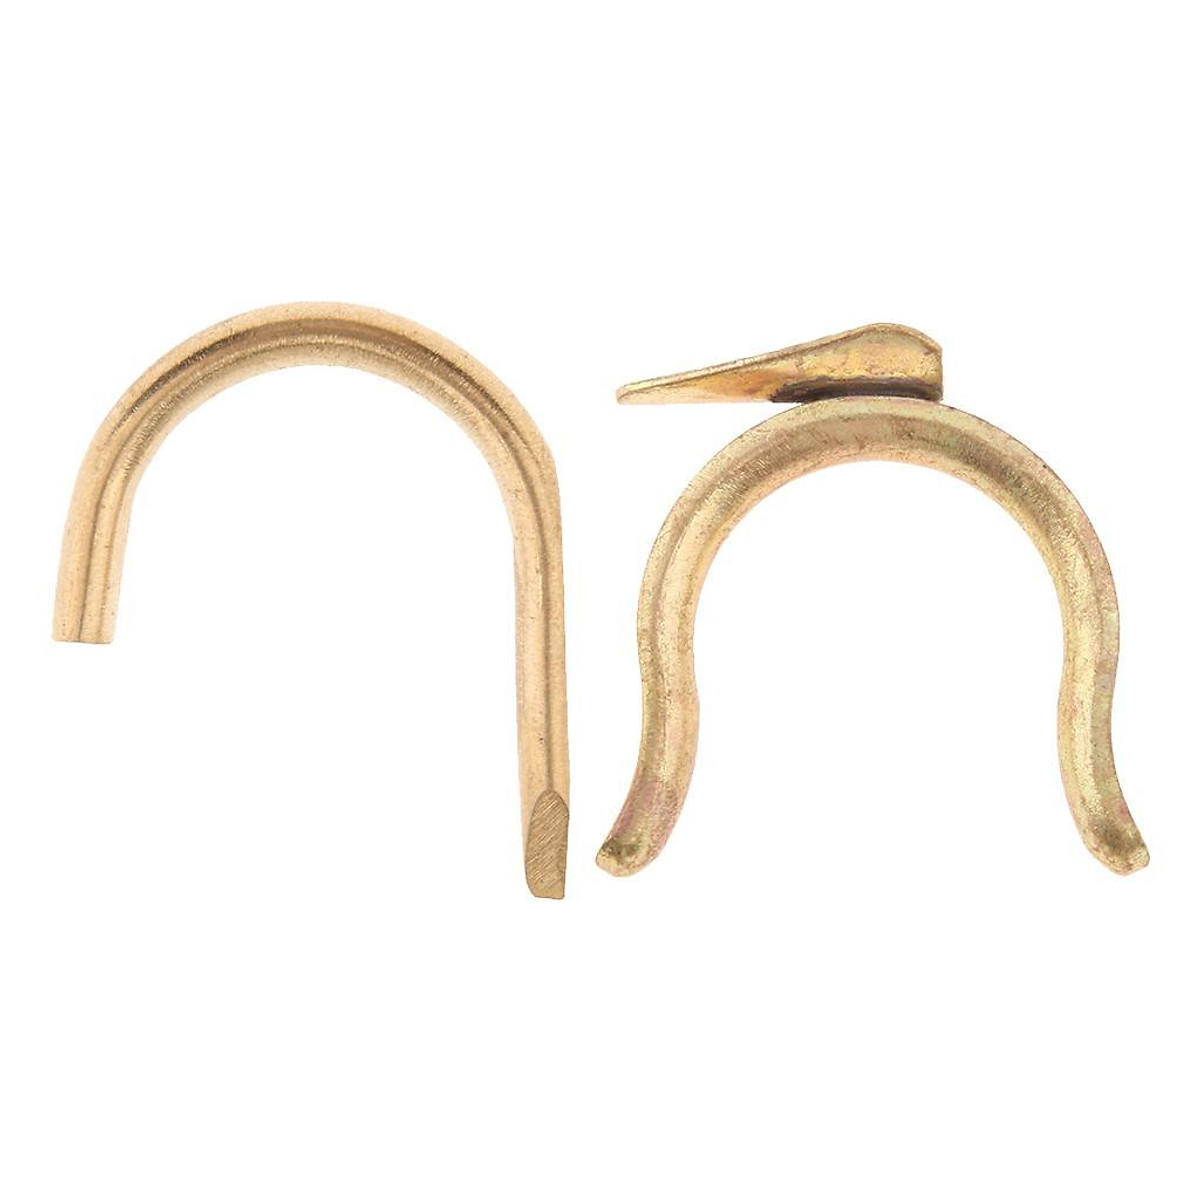 Size_1 LoveinDIY Trumpet Finger Hook Copper Material for Students Performance 